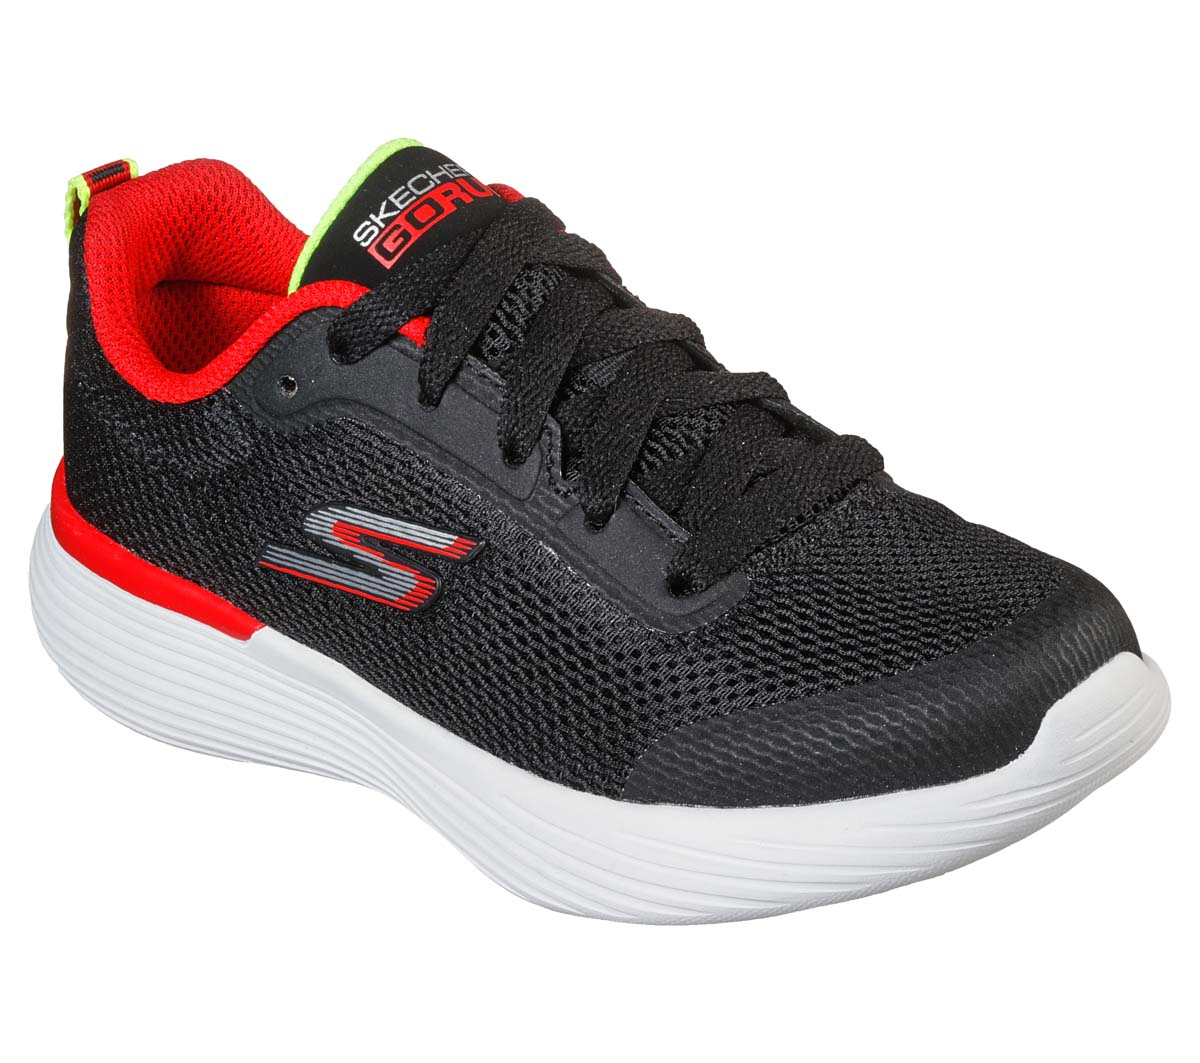 Skechers Go Run 400 Lace Black Red Kids Trainers 405100L In Size 35 In Plain Black Red For kids